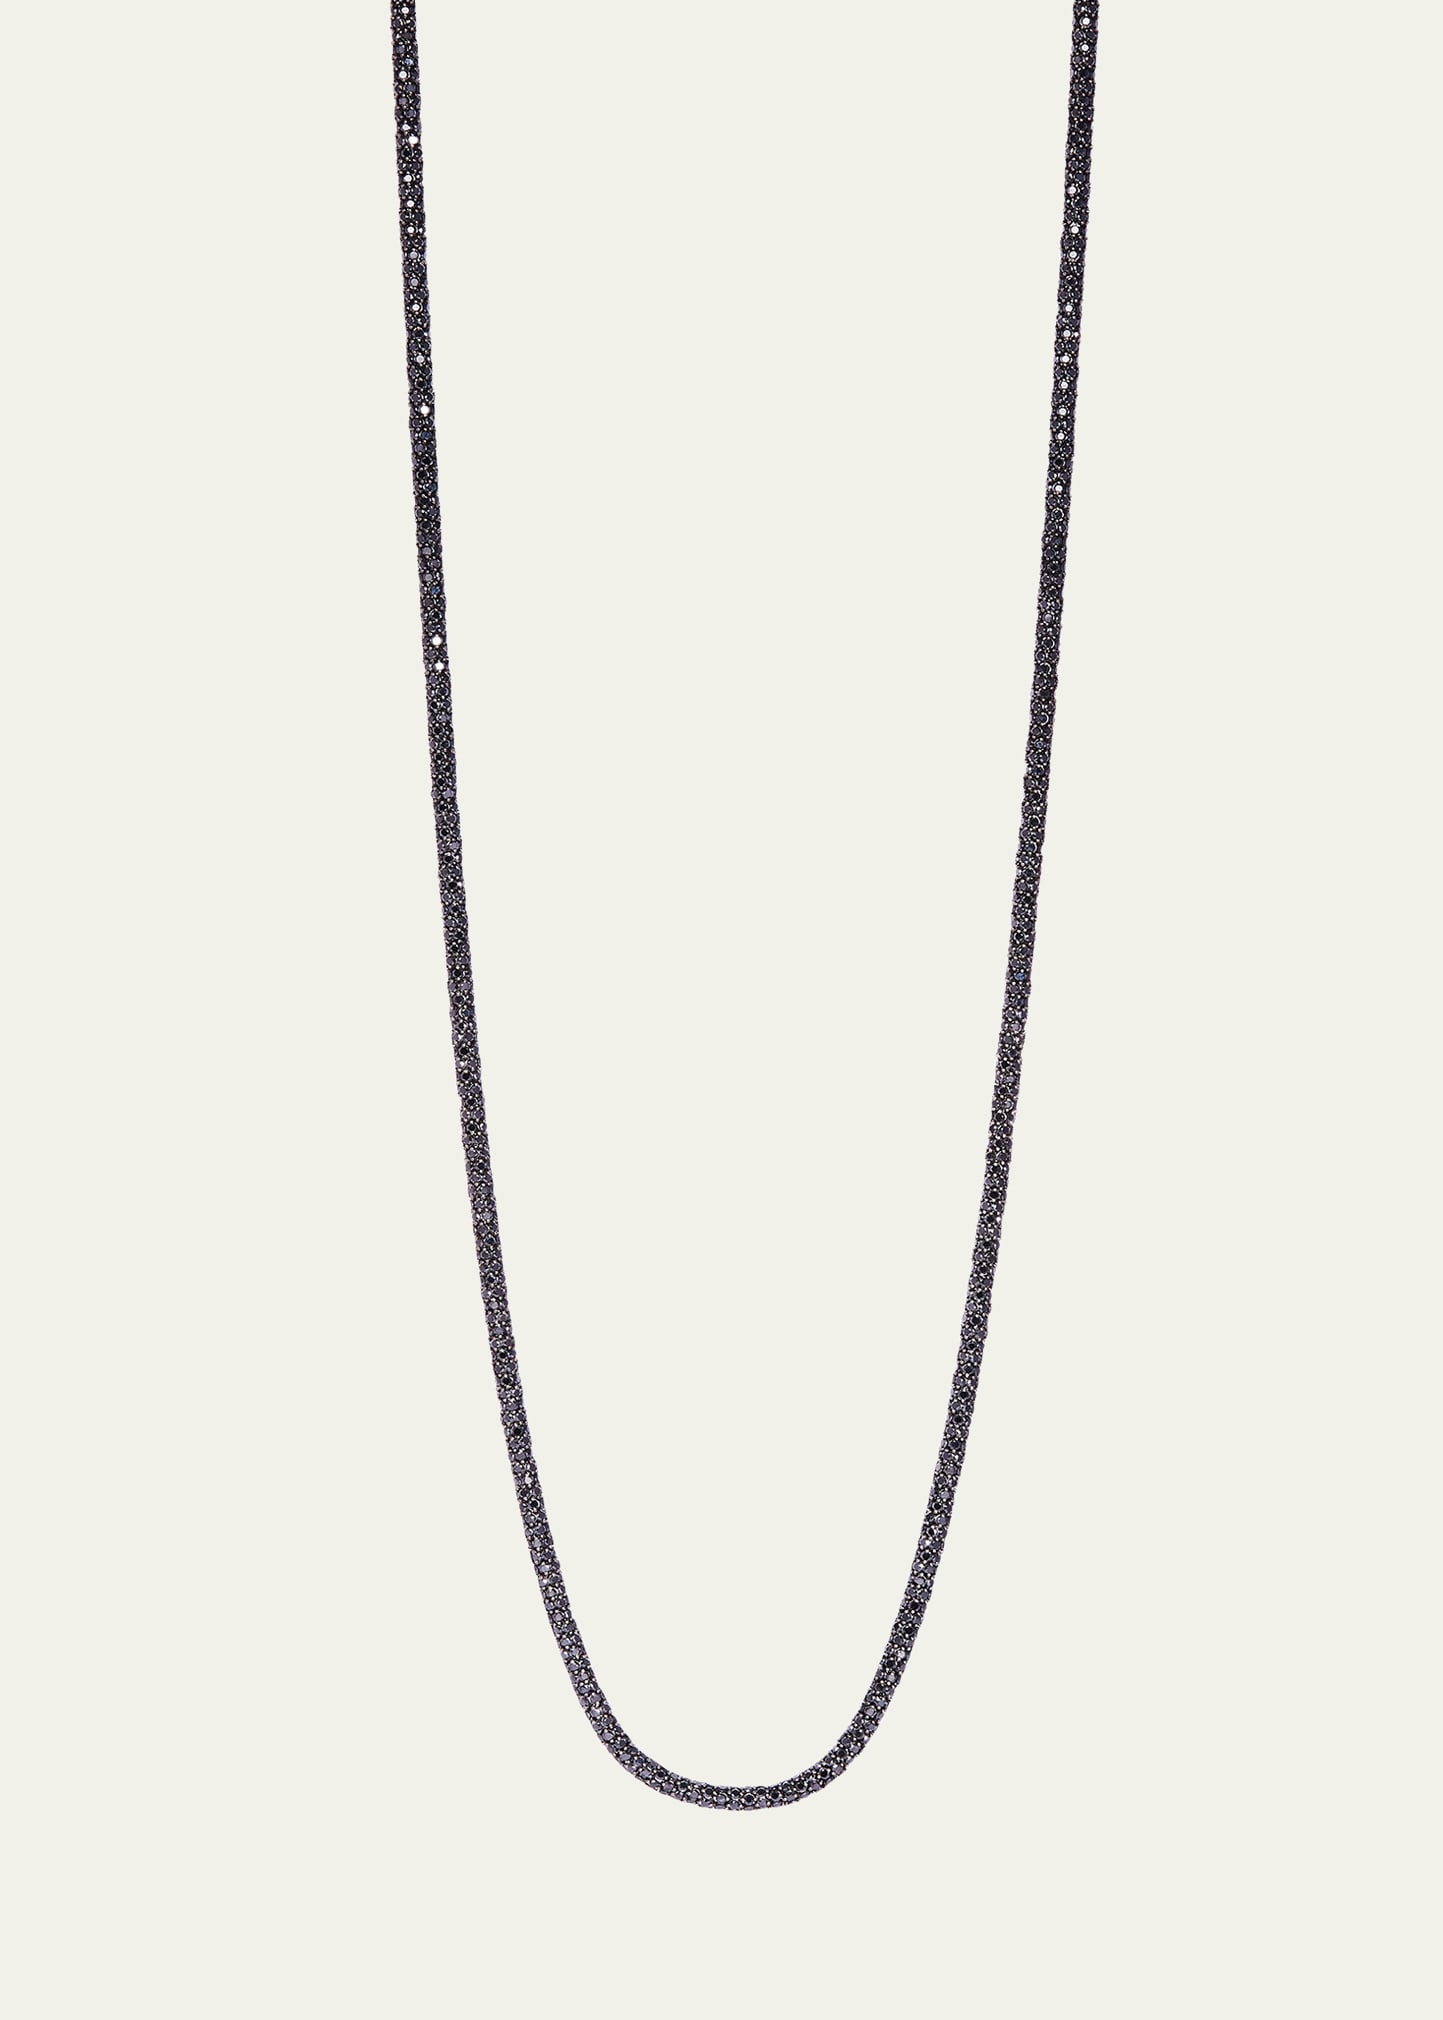 Rope Necklace with Black and White Diamonds